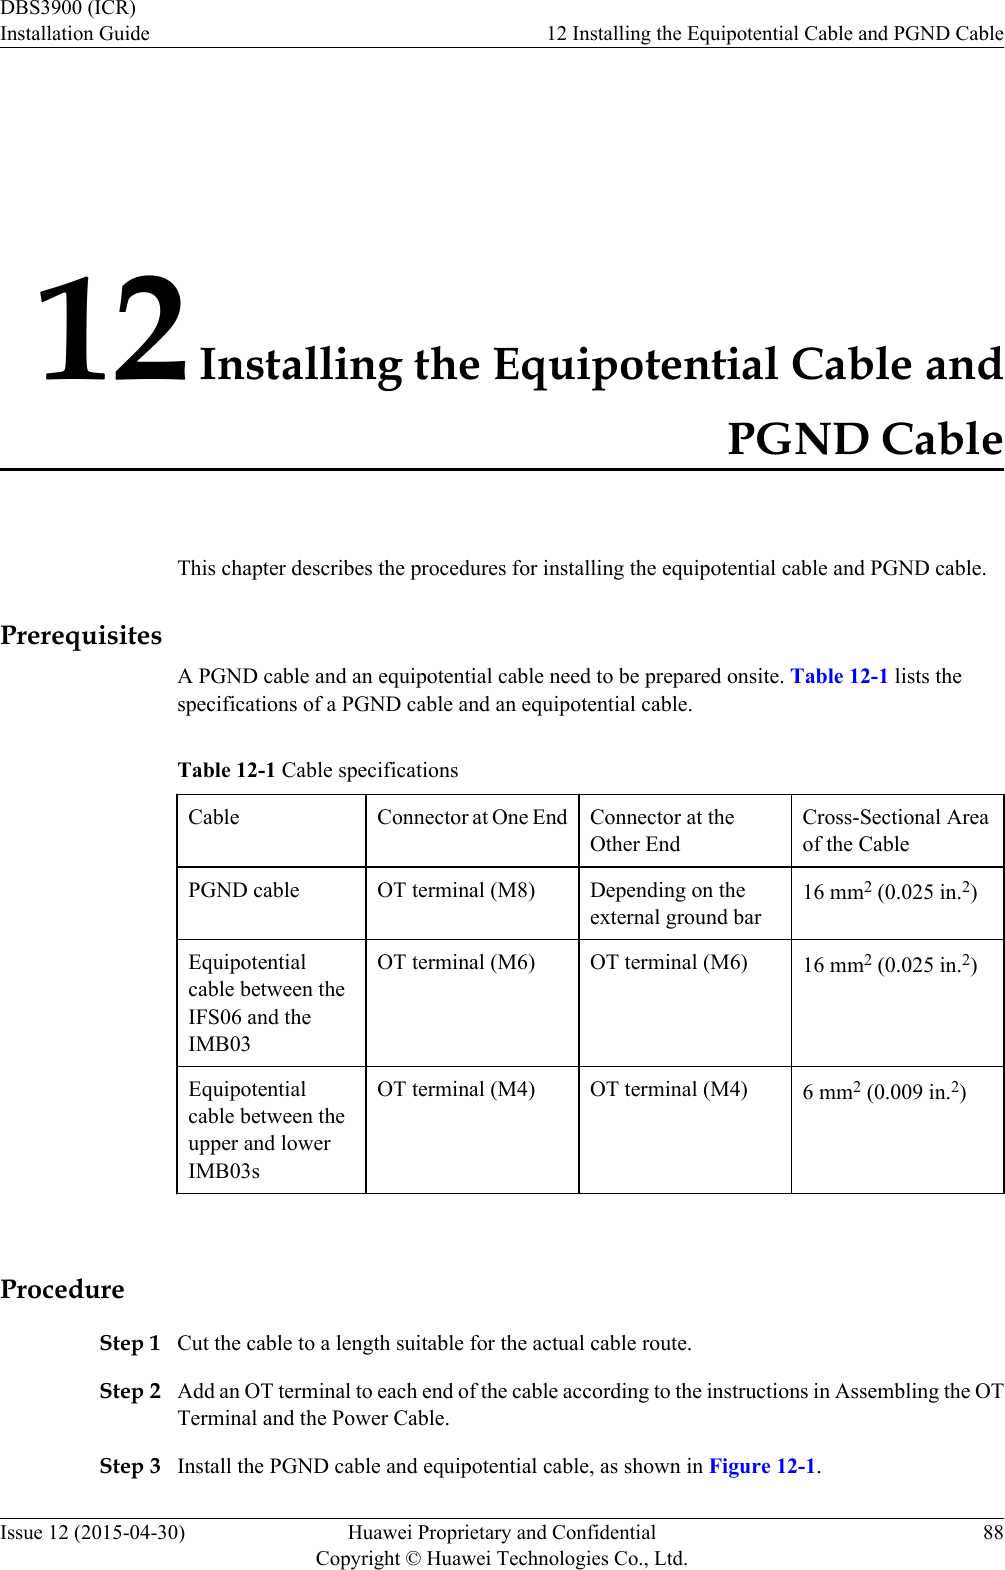 12 Installing the Equipotential Cable andPGND CableThis chapter describes the procedures for installing the equipotential cable and PGND cable.PrerequisitesA PGND cable and an equipotential cable need to be prepared onsite. Table 12-1 lists thespecifications of a PGND cable and an equipotential cable.Table 12-1 Cable specificationsCable Connector at One End Connector at theOther EndCross-Sectional Areaof the CablePGND cable OT terminal (M8) Depending on theexternal ground bar16 mm2 (0.025 in.2)Equipotentialcable between theIFS06 and theIMB03OT terminal (M6) OT terminal (M6) 16 mm2 (0.025 in.2)Equipotentialcable between theupper and lowerIMB03sOT terminal (M4) OT terminal (M4) 6 mm2 (0.009 in.2) ProcedureStep 1 Cut the cable to a length suitable for the actual cable route.Step 2 Add an OT terminal to each end of the cable according to the instructions in Assembling the OTTerminal and the Power Cable.Step 3 Install the PGND cable and equipotential cable, as shown in Figure 12-1.DBS3900 (ICR)Installation Guide 12 Installing the Equipotential Cable and PGND CableIssue 12 (2015-04-30) Huawei Proprietary and ConfidentialCopyright © Huawei Technologies Co., Ltd.88